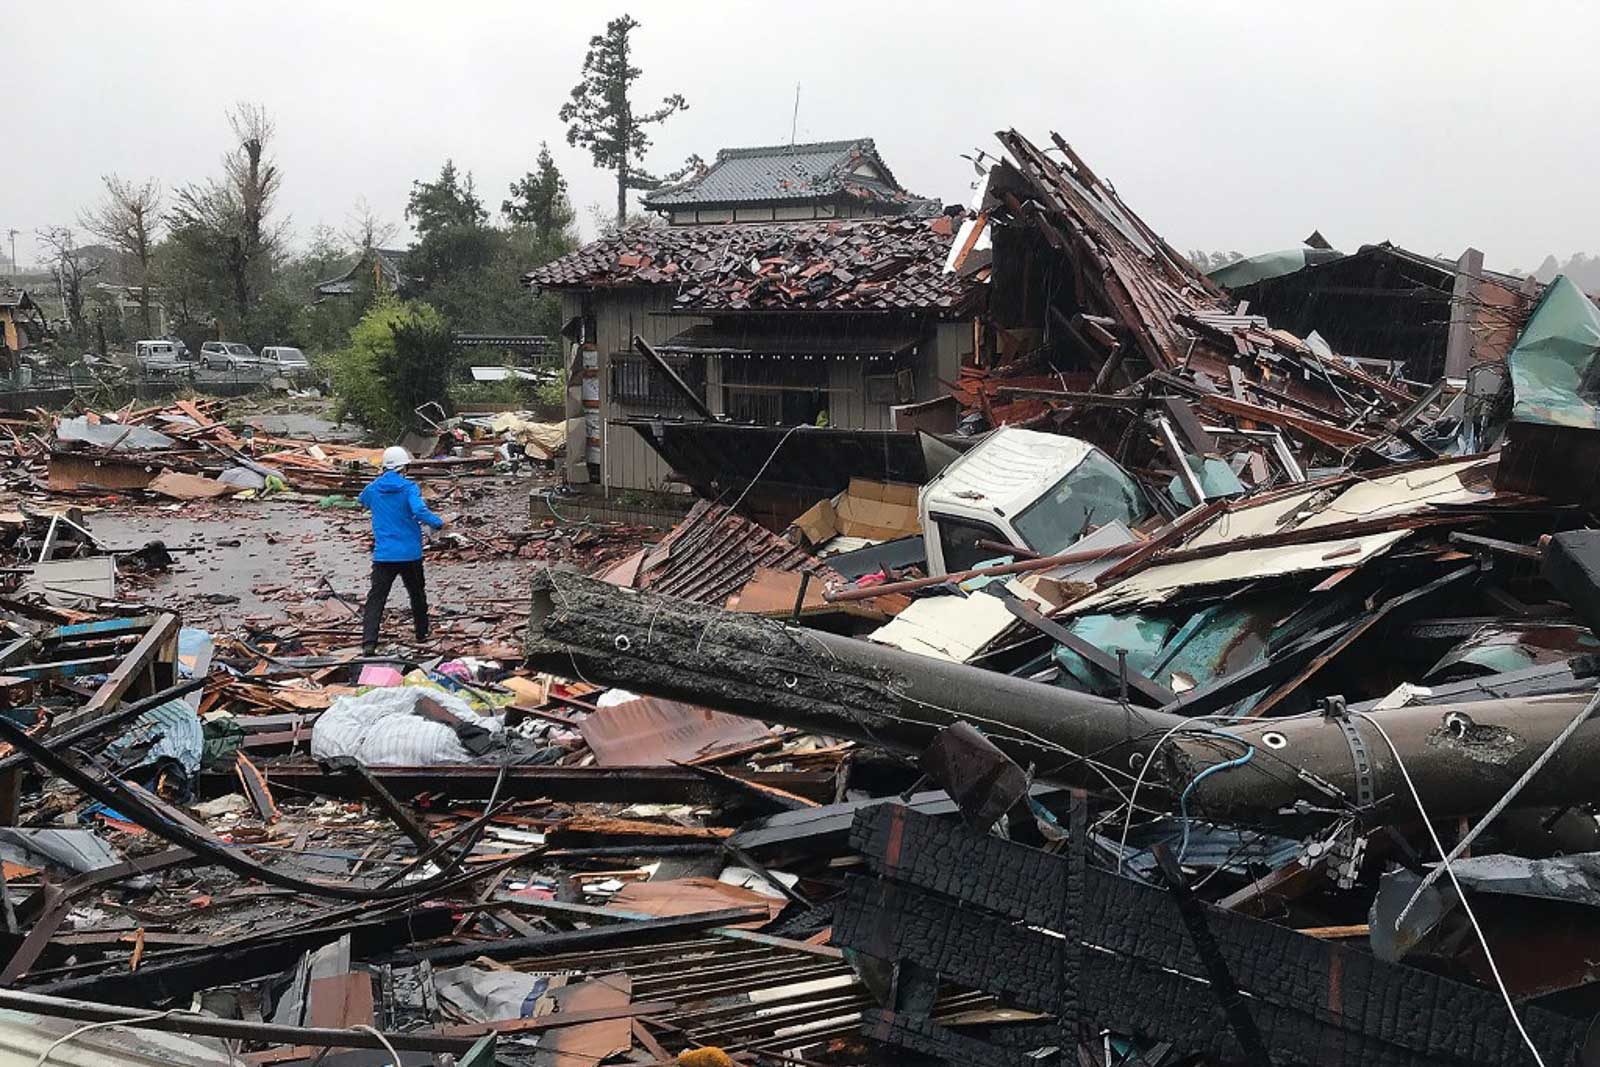 IN PHOTOS: Japan braces for ‘large, very strong’ Typhoon Hagibis